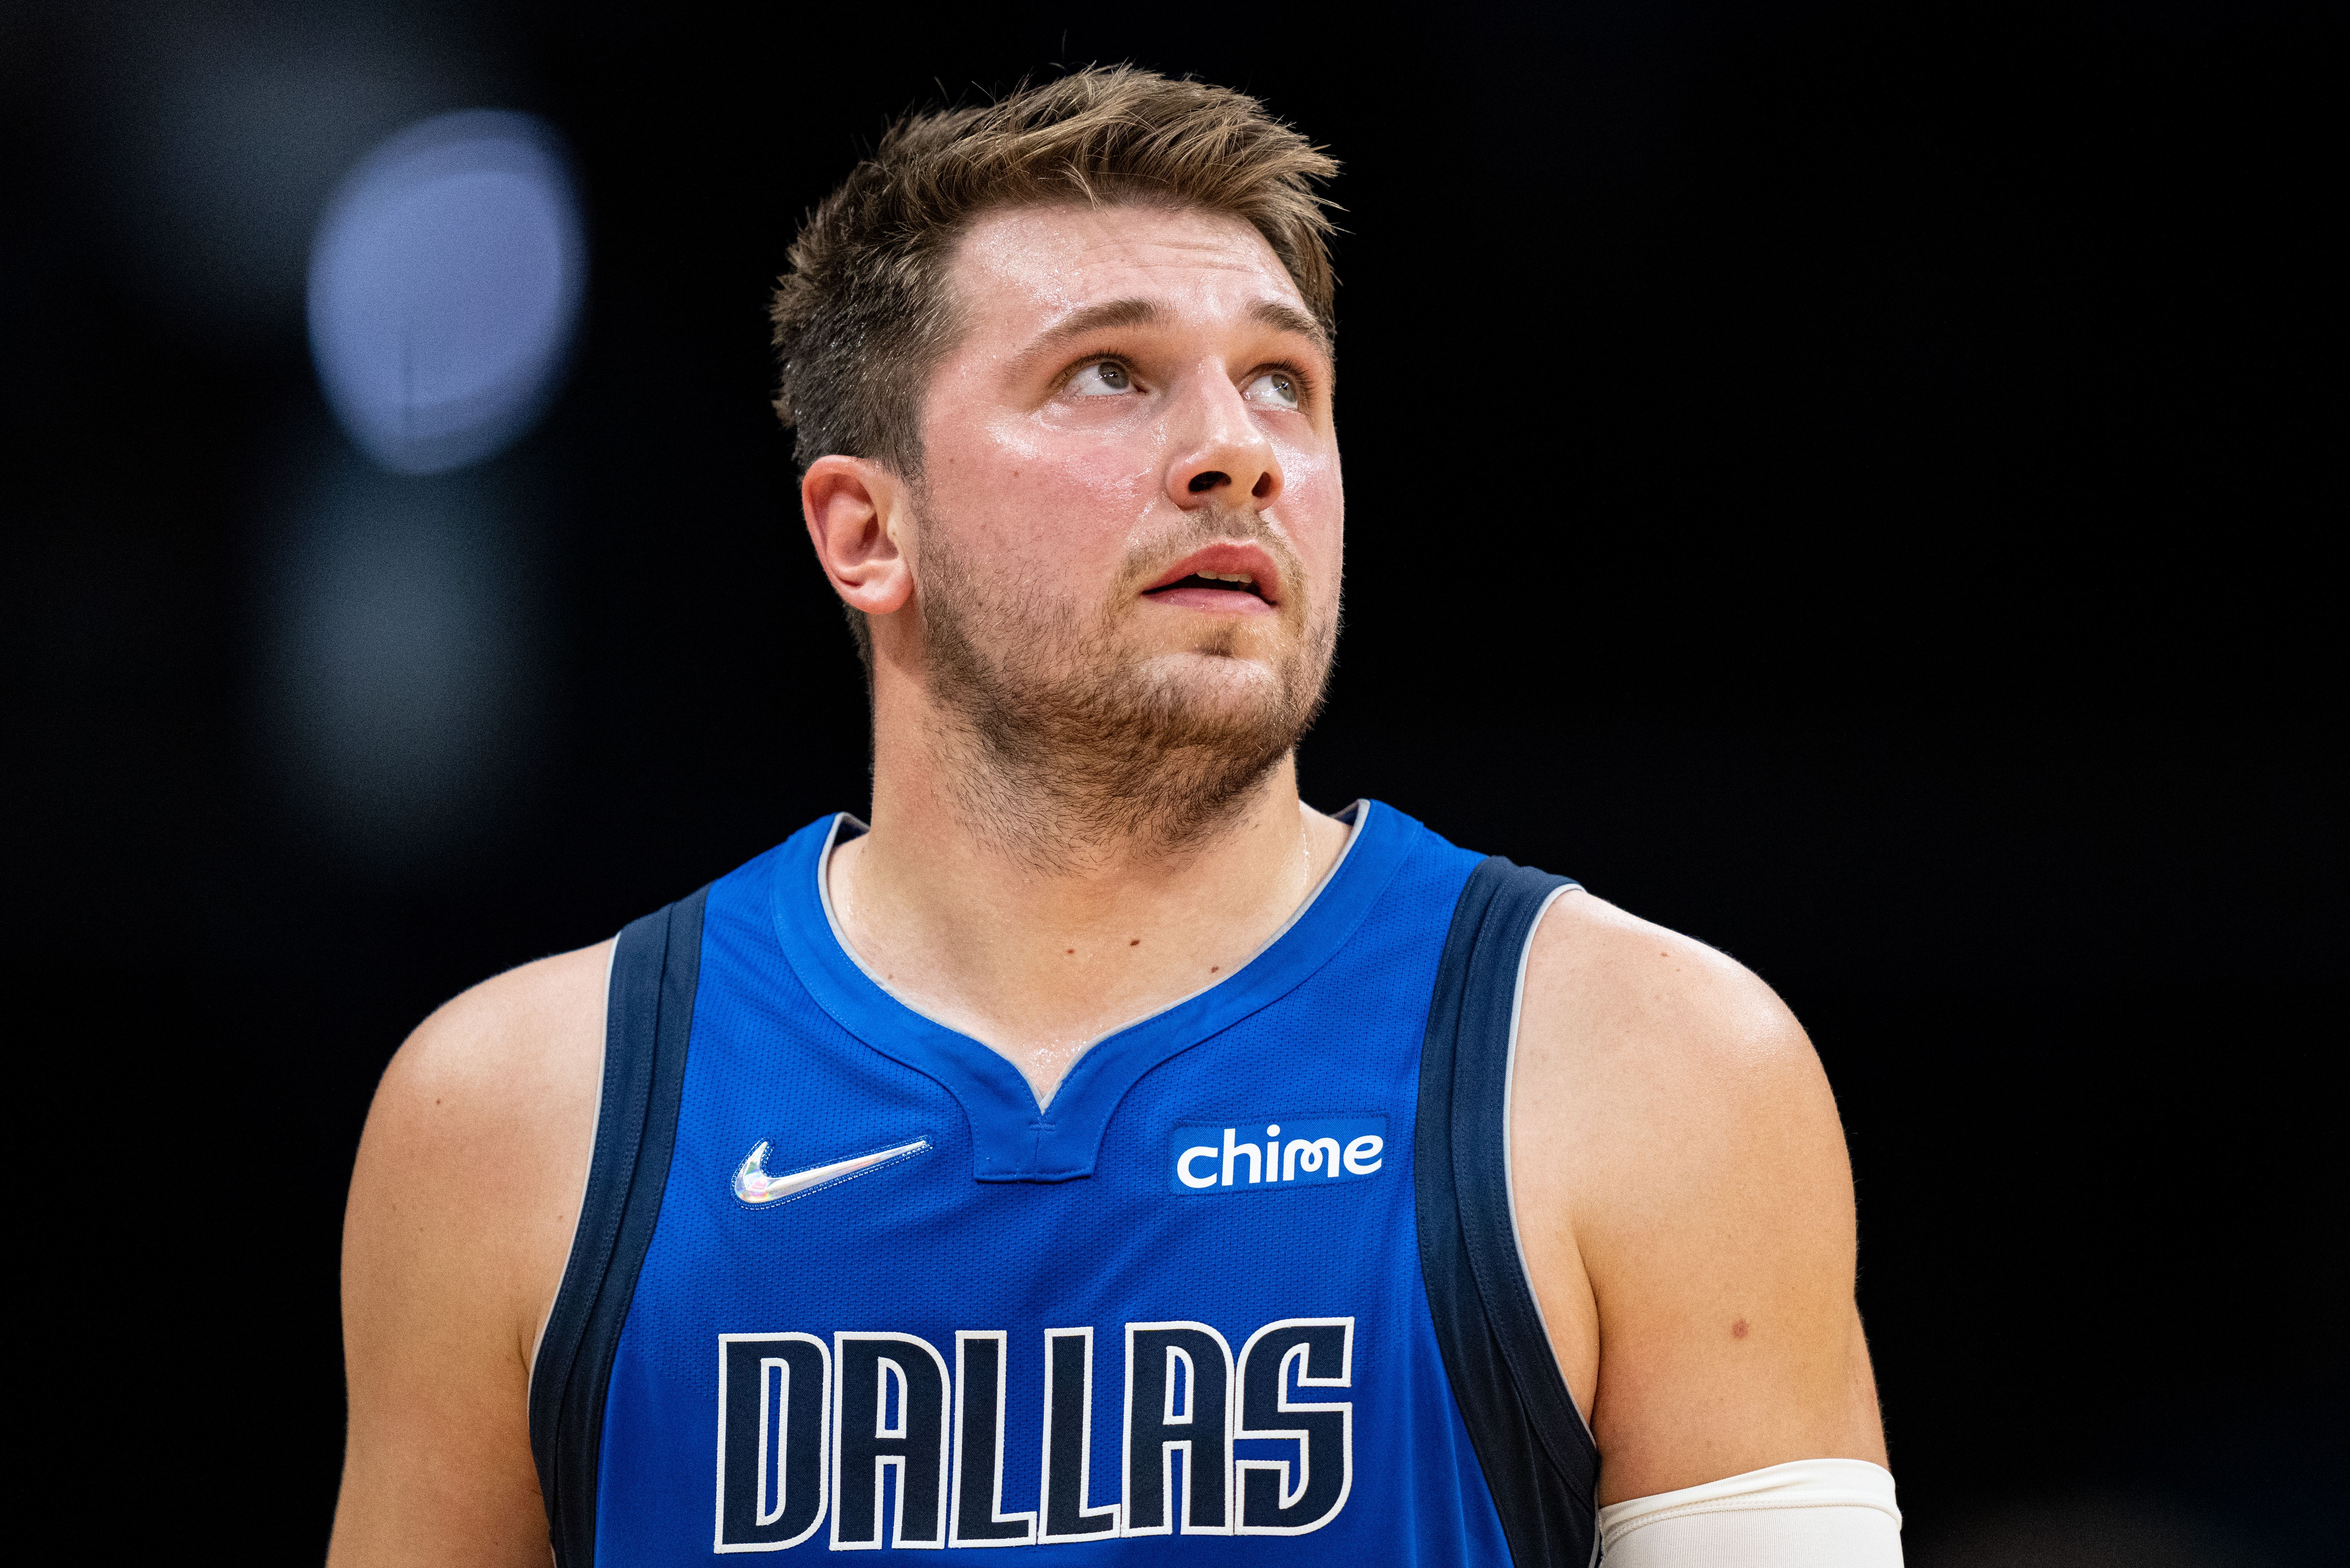 Dallas Mavericks Luka Doncic leaves early after injuring ankle